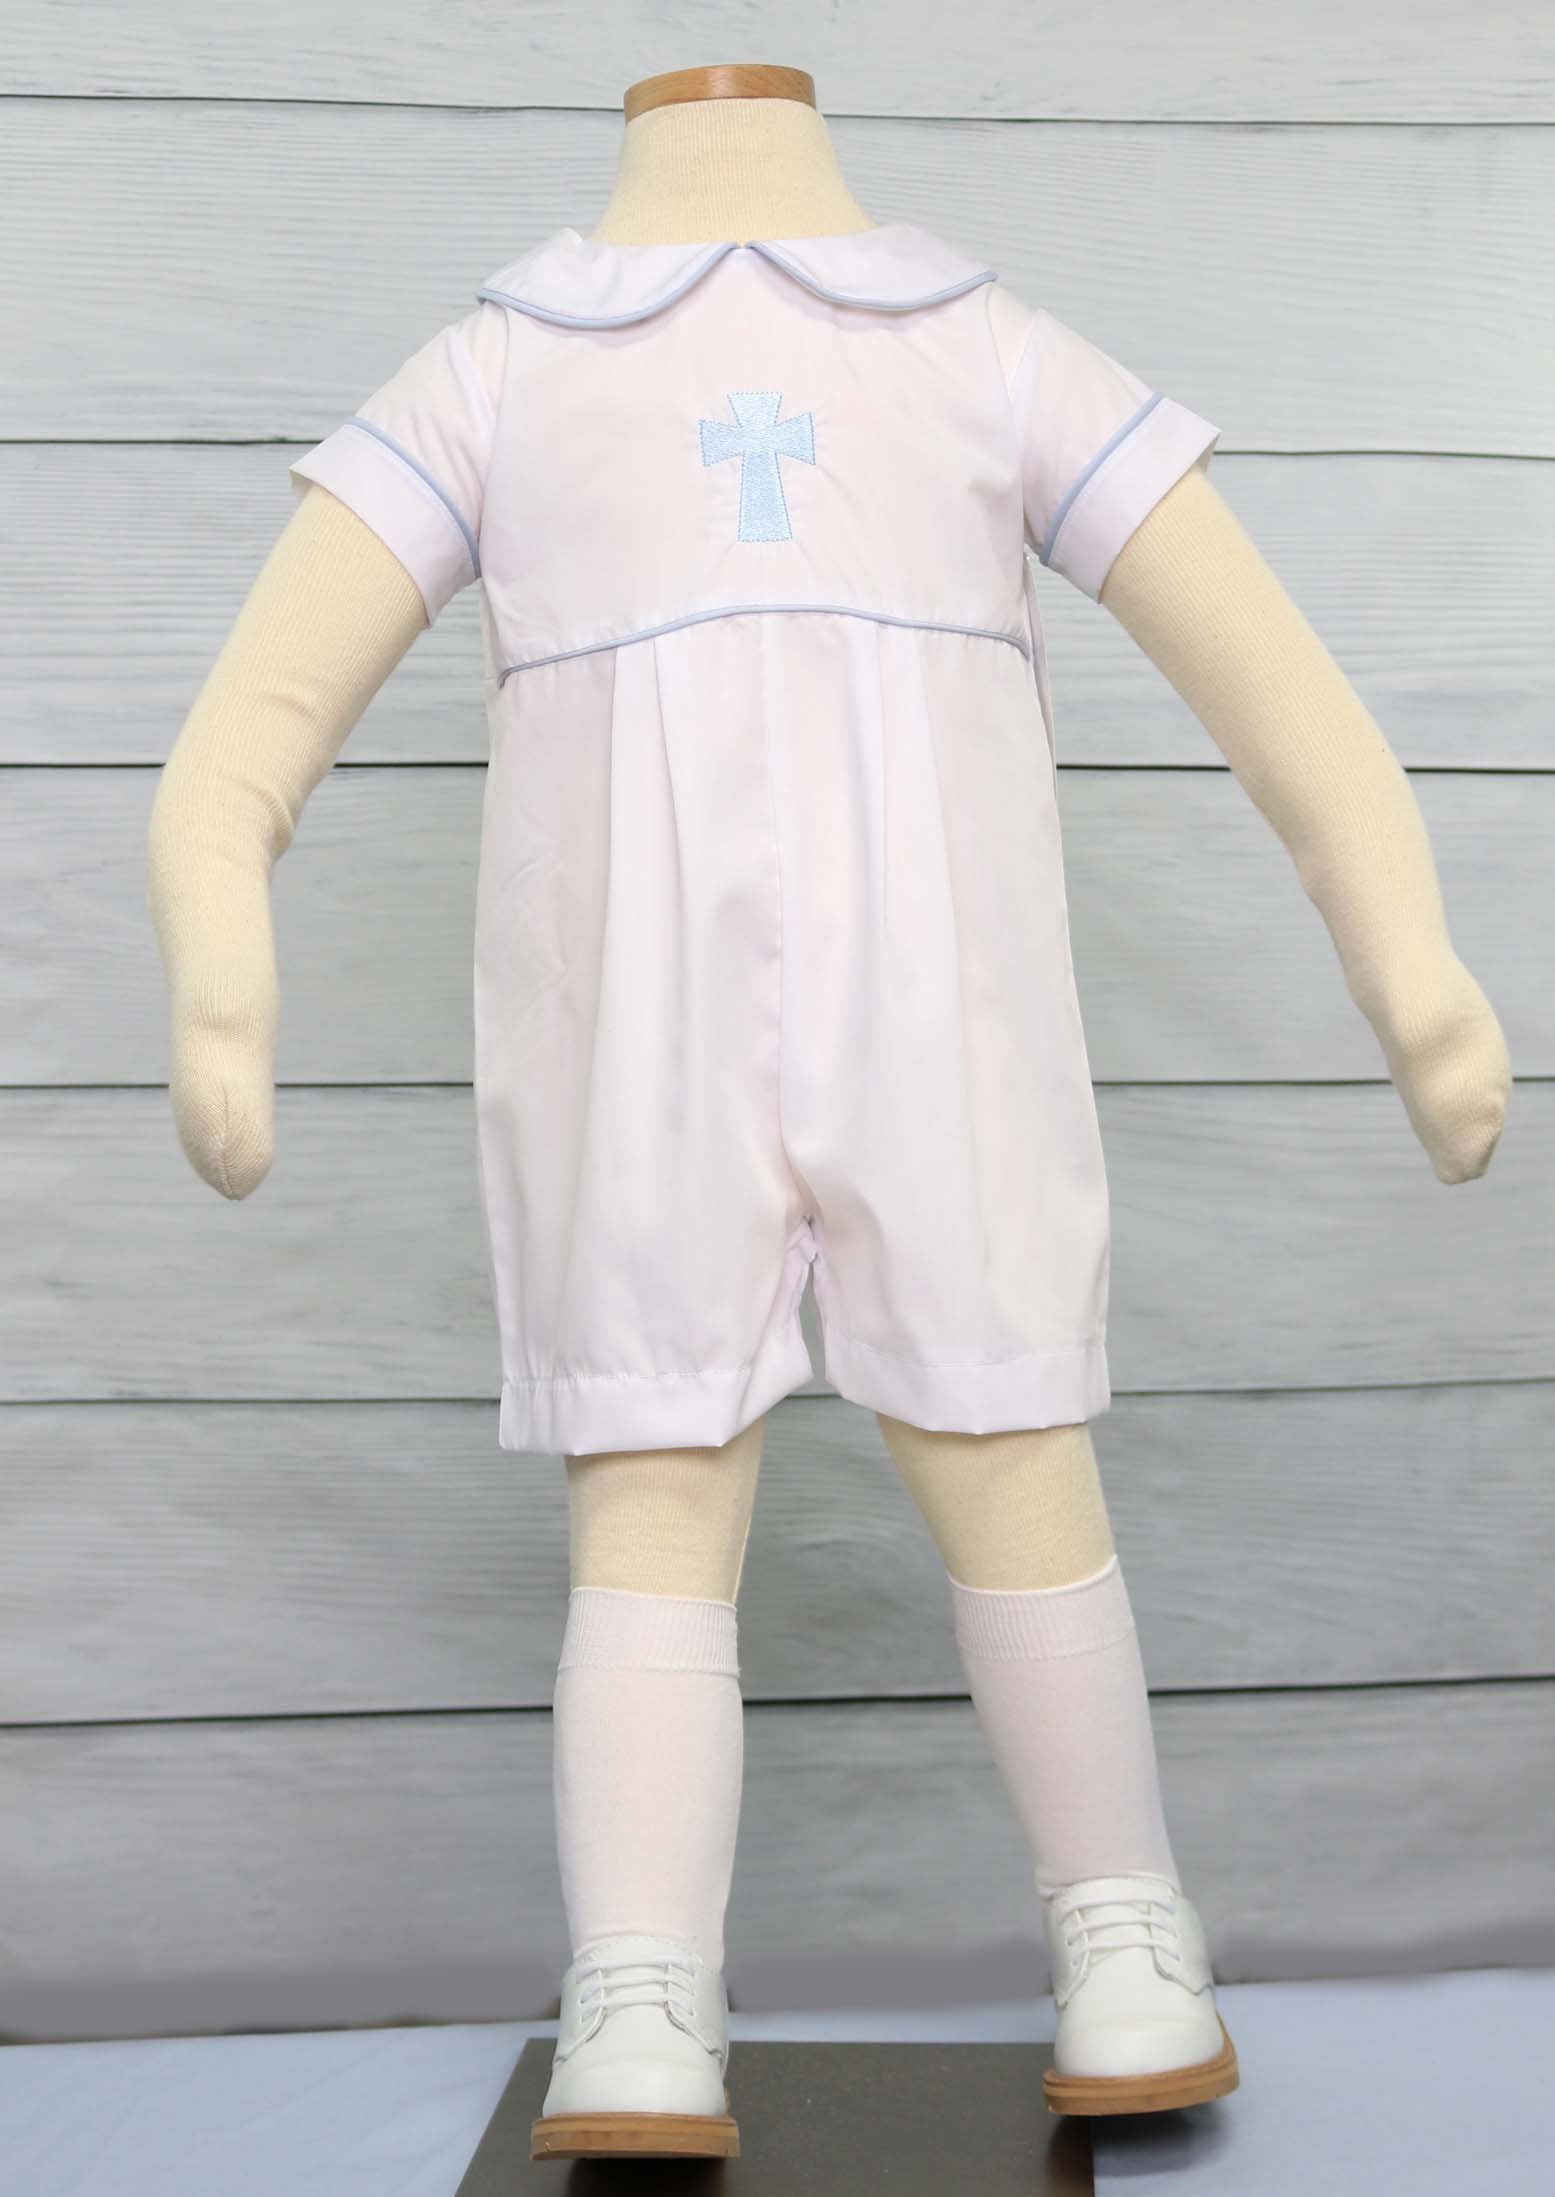 2t boy baptism outfit